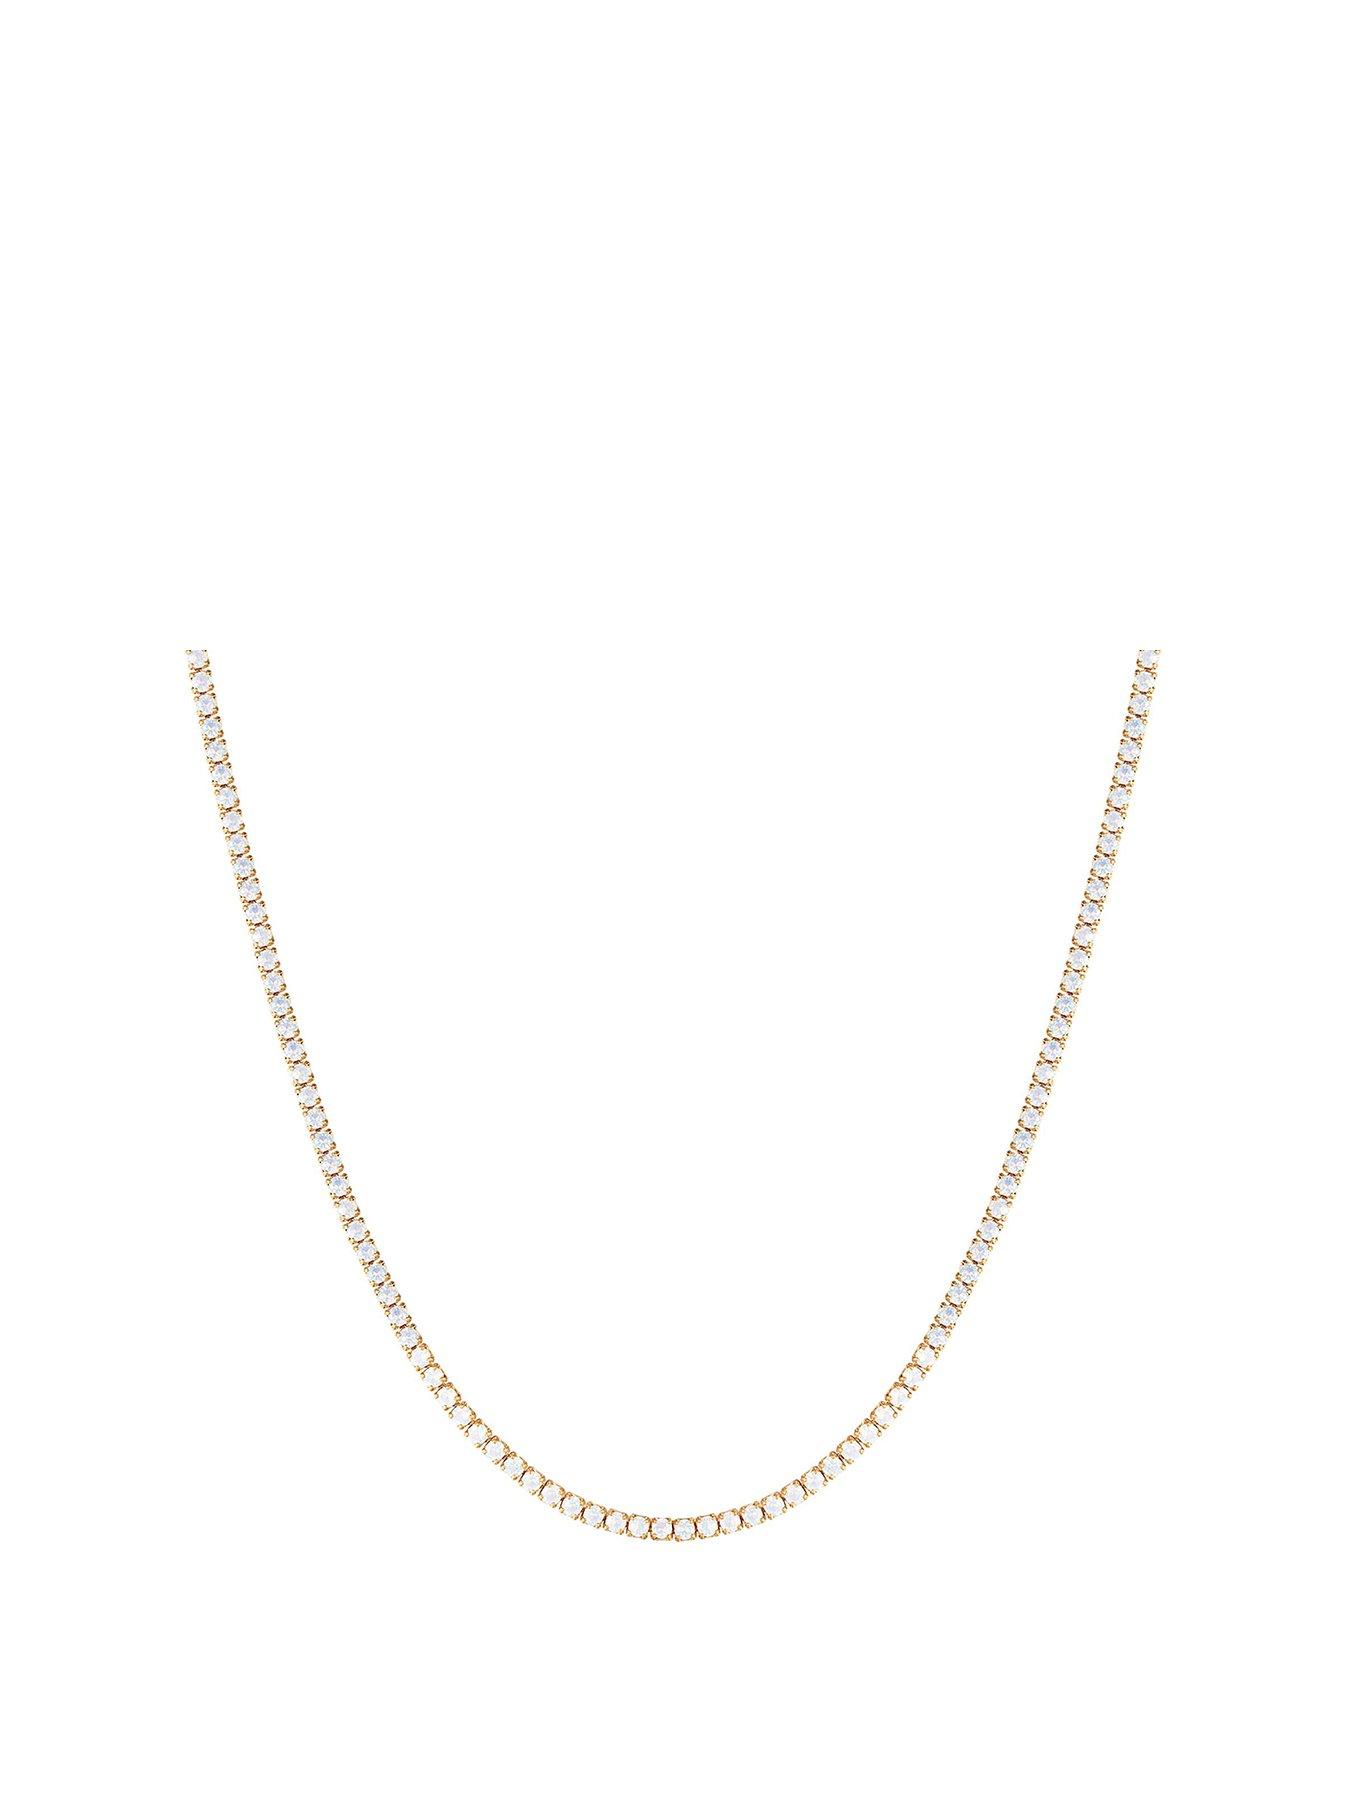 GOLD VERMEIL STERLING COLLAR NECKLACE